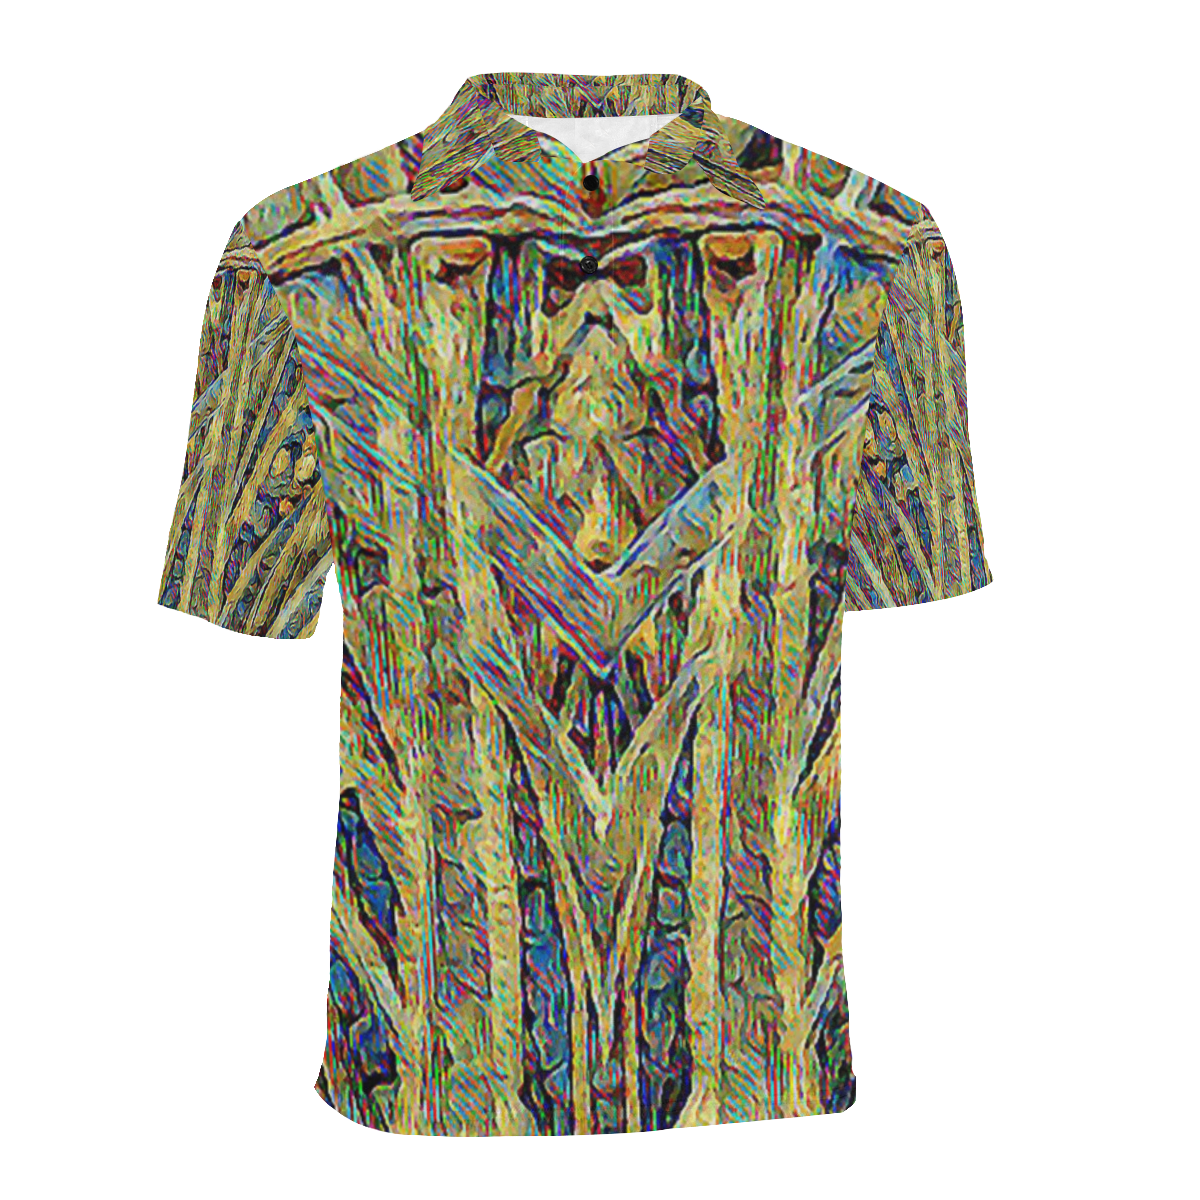 Running by the River Men's All Over Print Polo Shirt (Model T55)